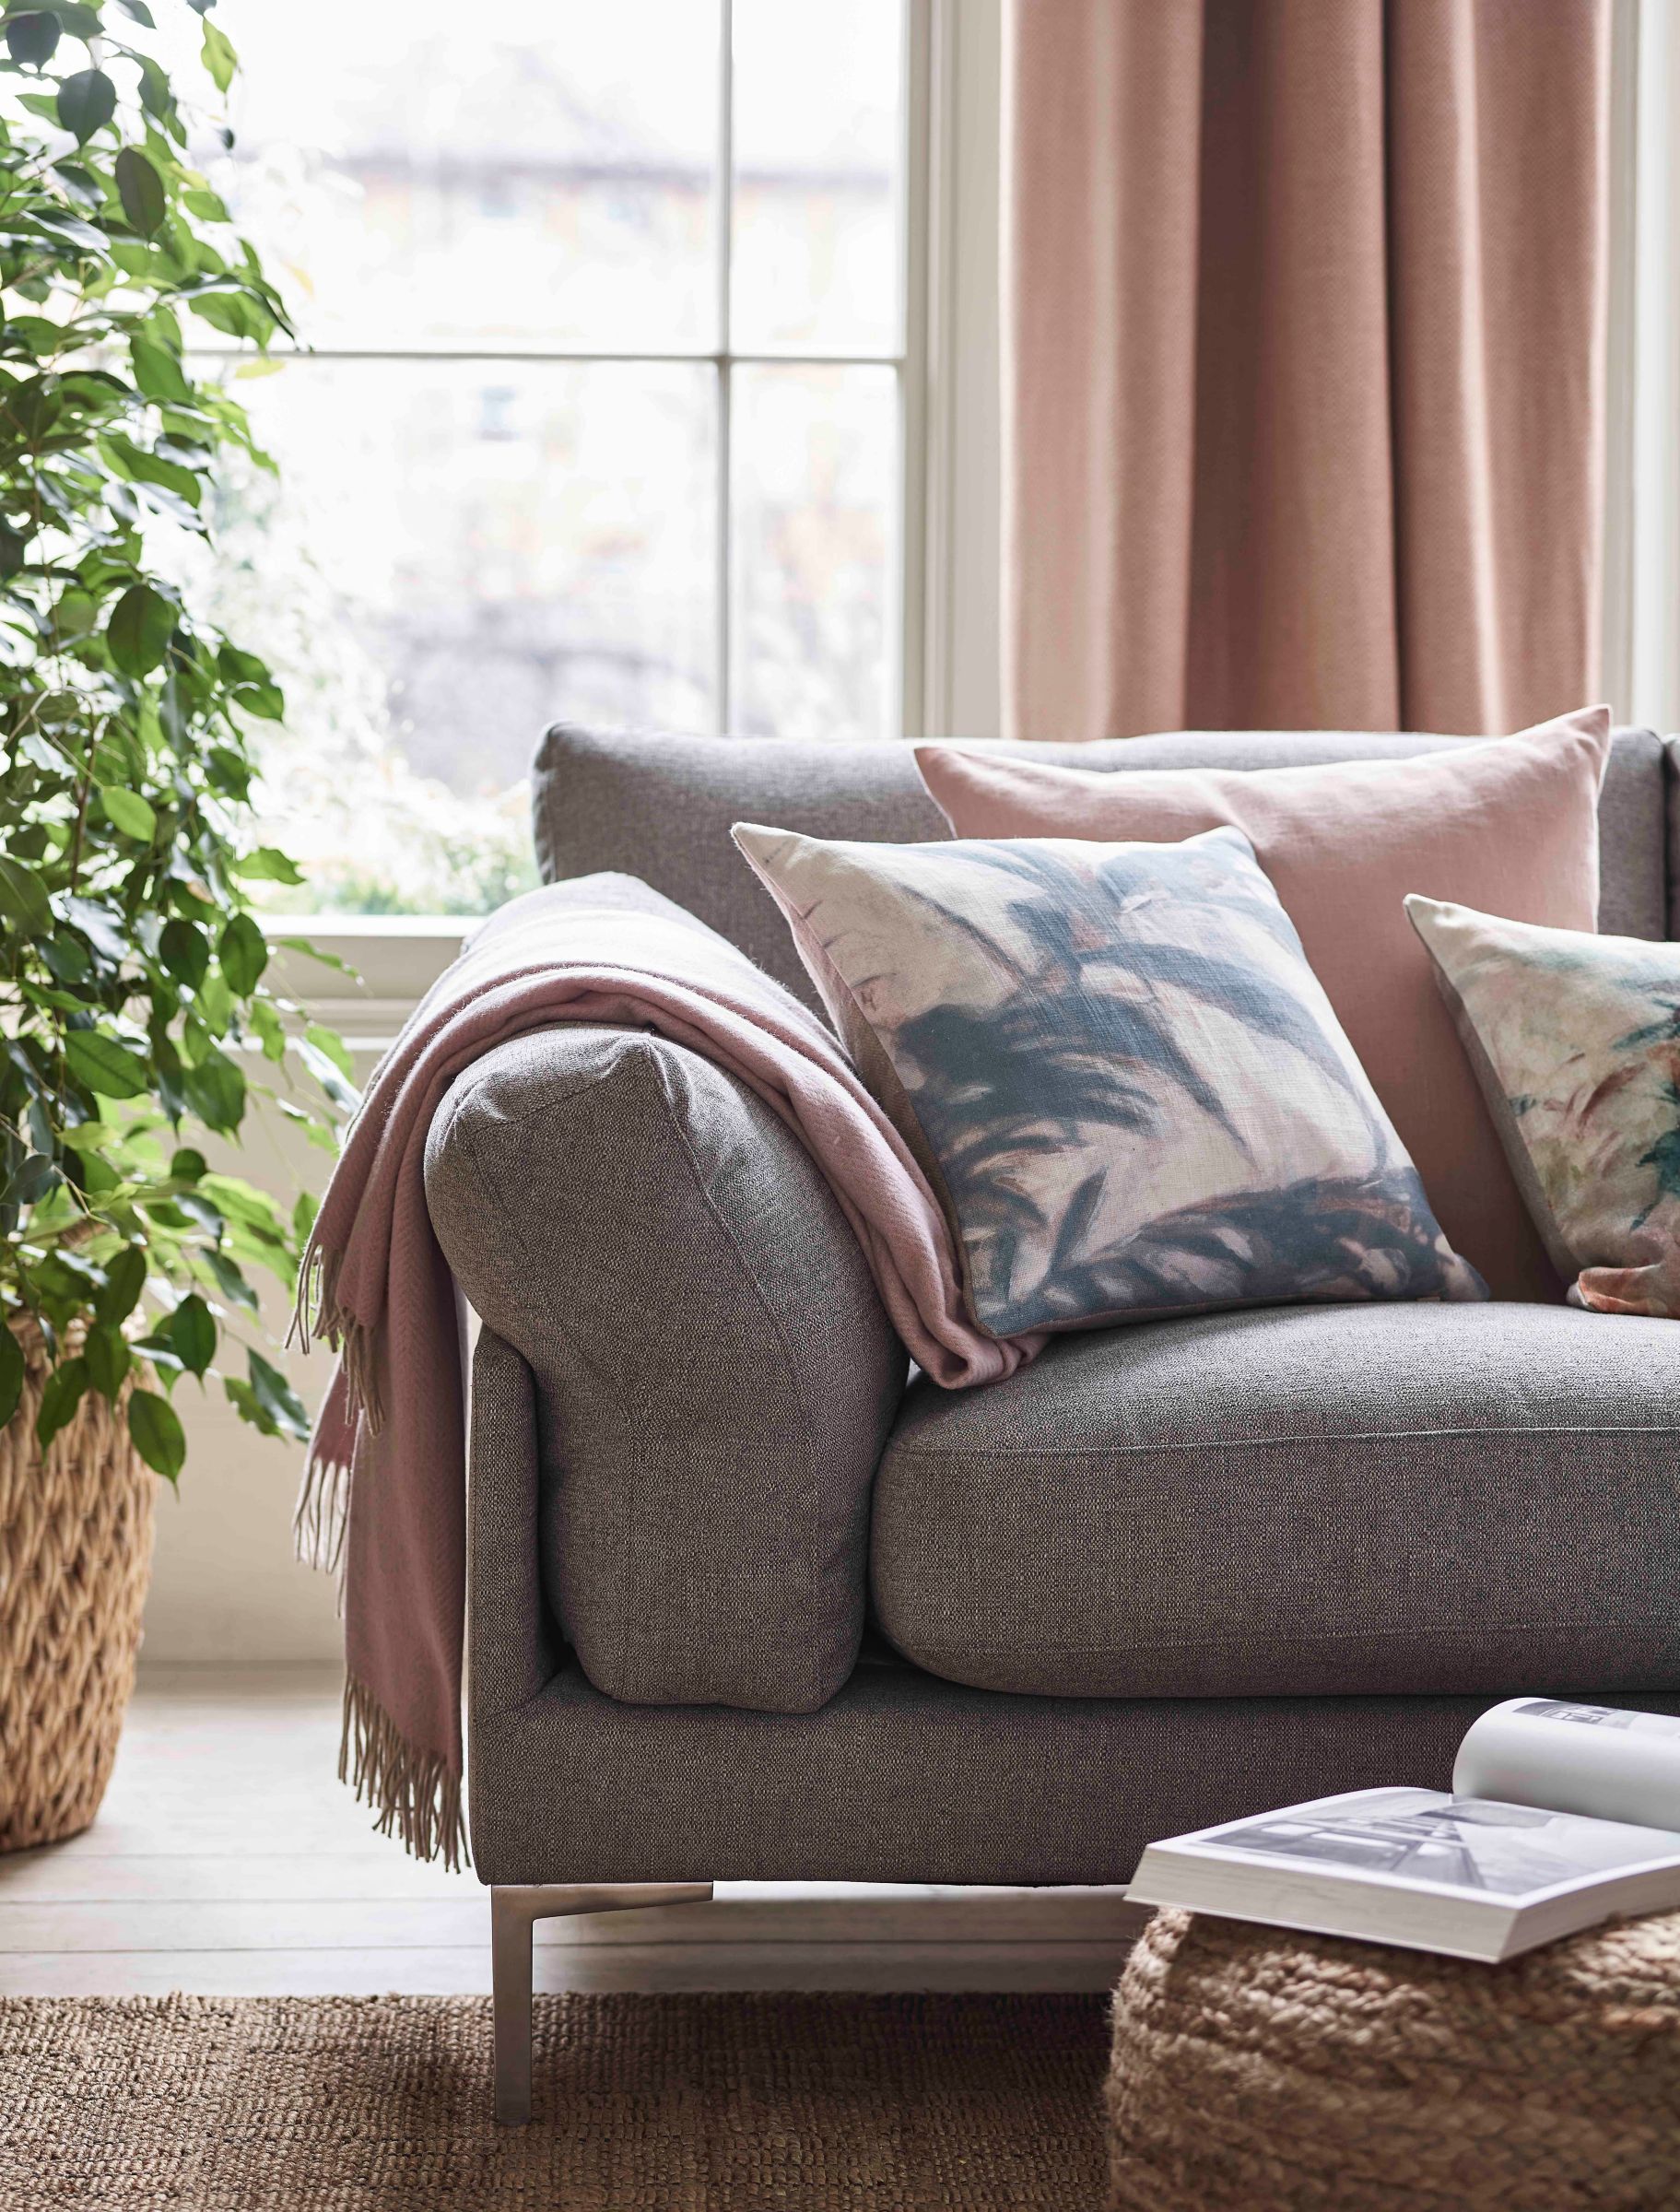 How To Dress A Sofa John Lewis Partners, How To Dress A Corner Sofa With Throws